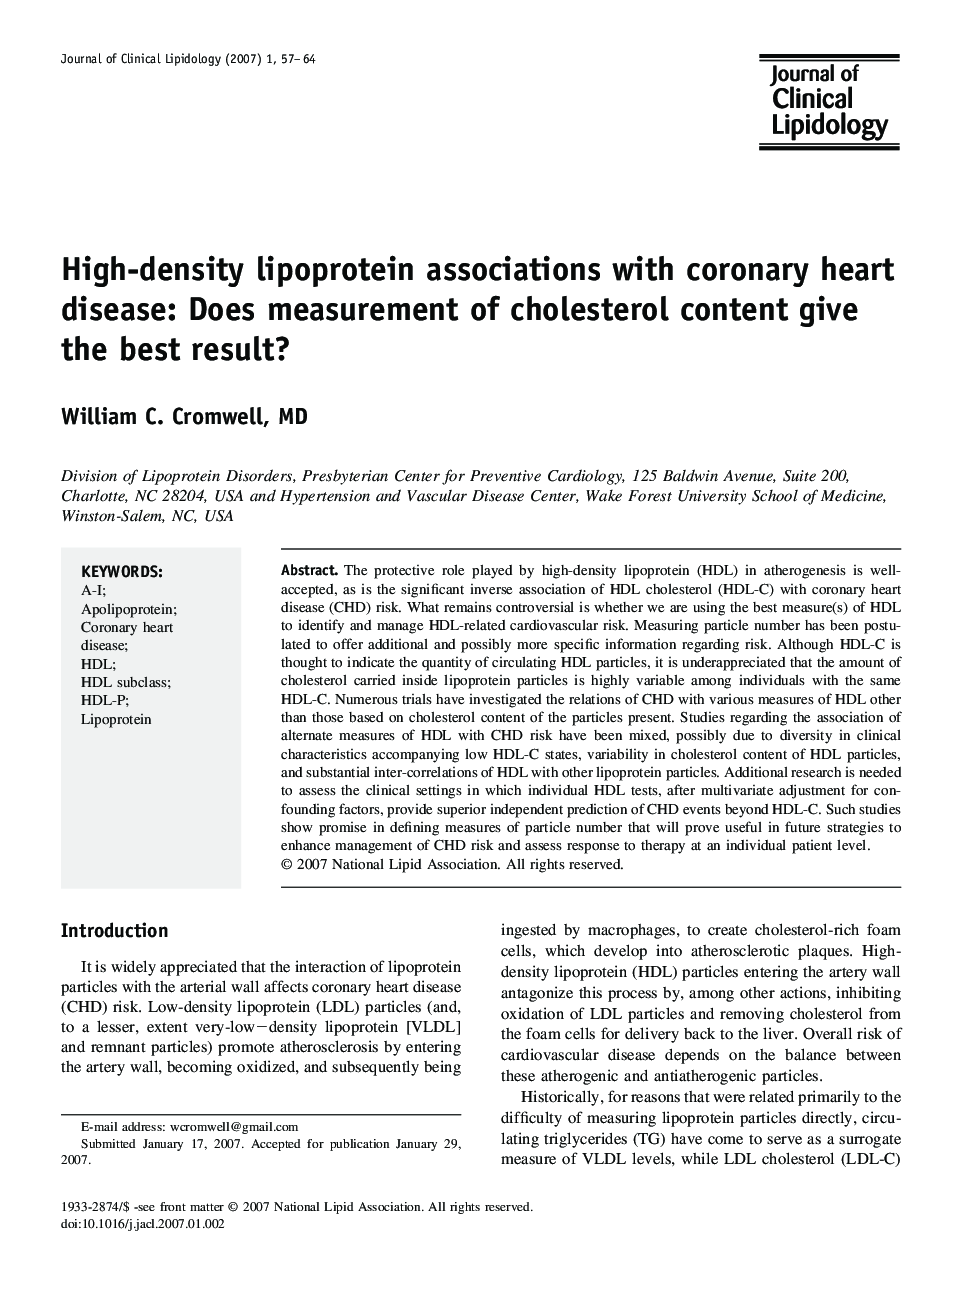 High-density lipoprotein associations with coronary heart disease: Does measurement of cholesterol content give the best result?